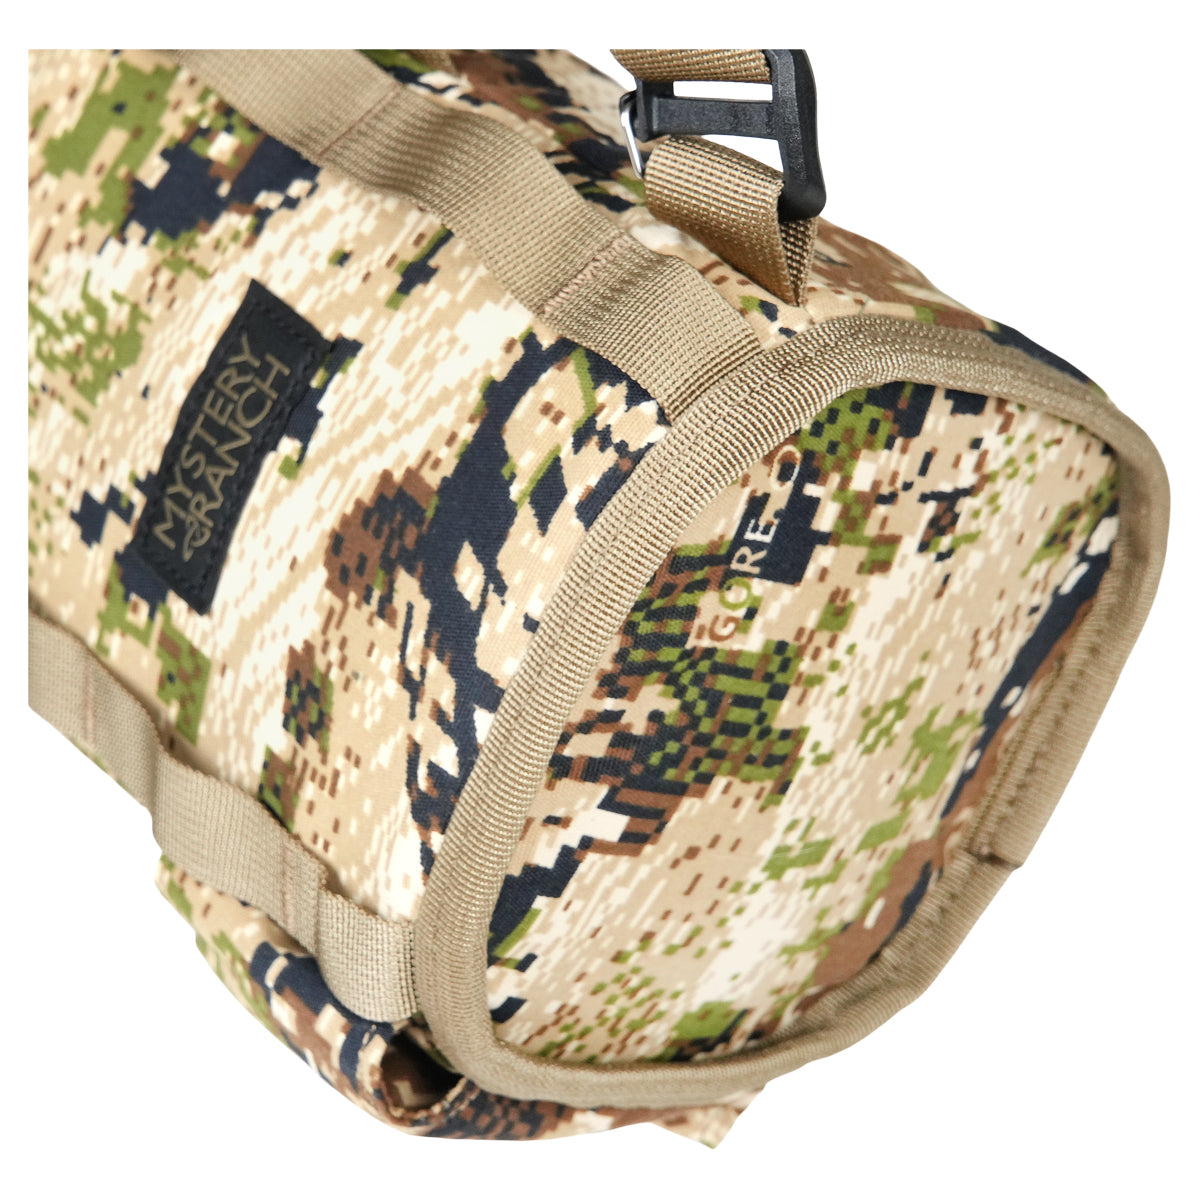 Mystery Ranch Spotting Scope Sling in Optifade Subalpine by GOHUNT | Mystery Ranch - GOHUNT Shop